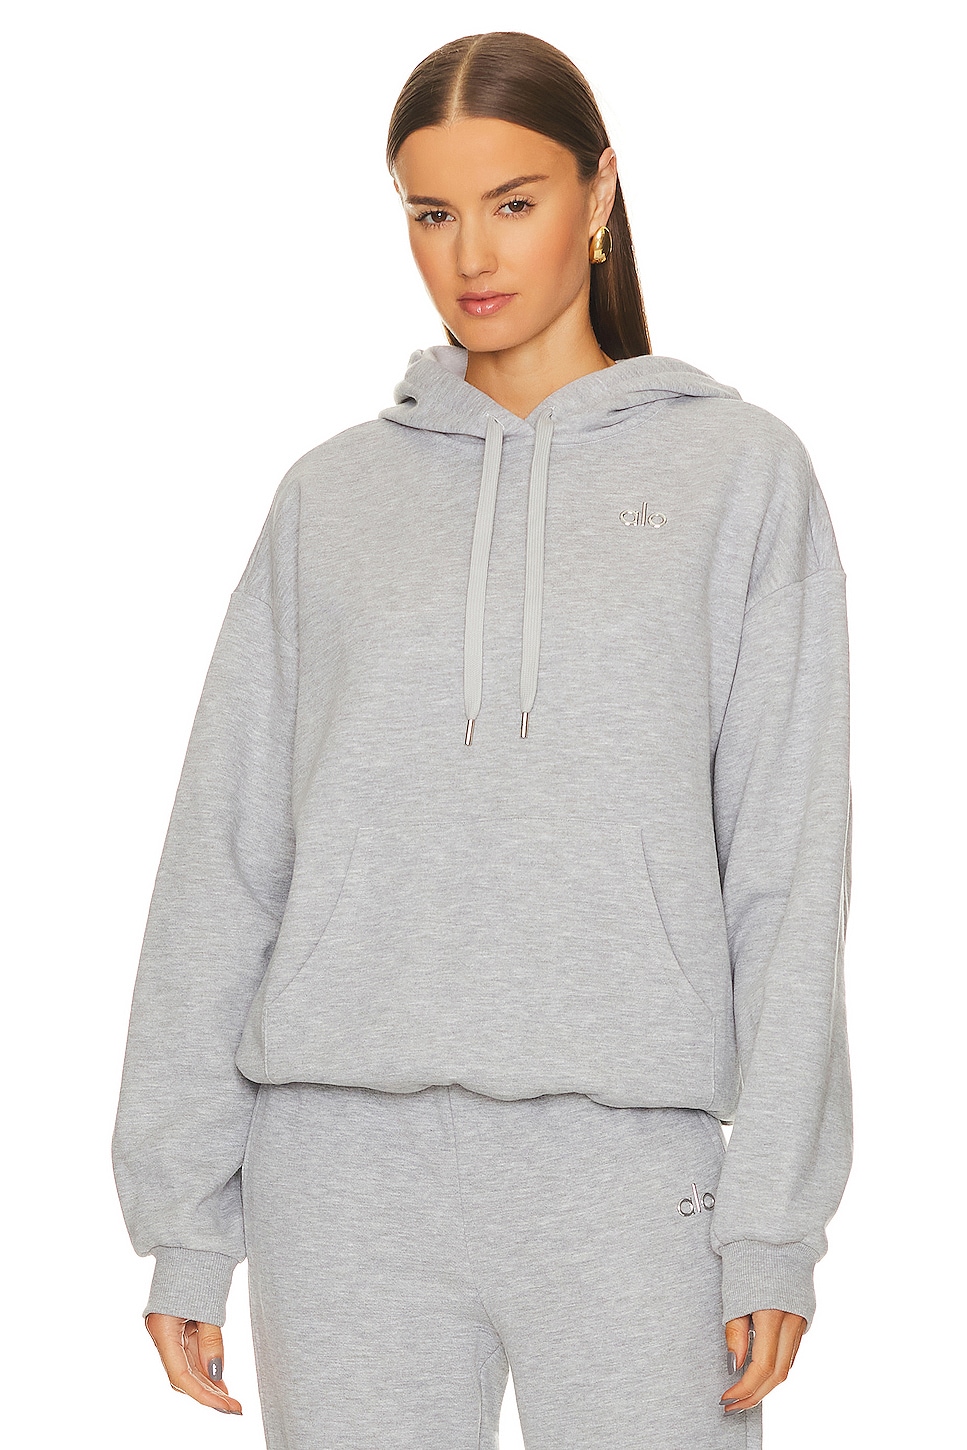 Accolade Hoodie - Athletic Heather Grey in 2023